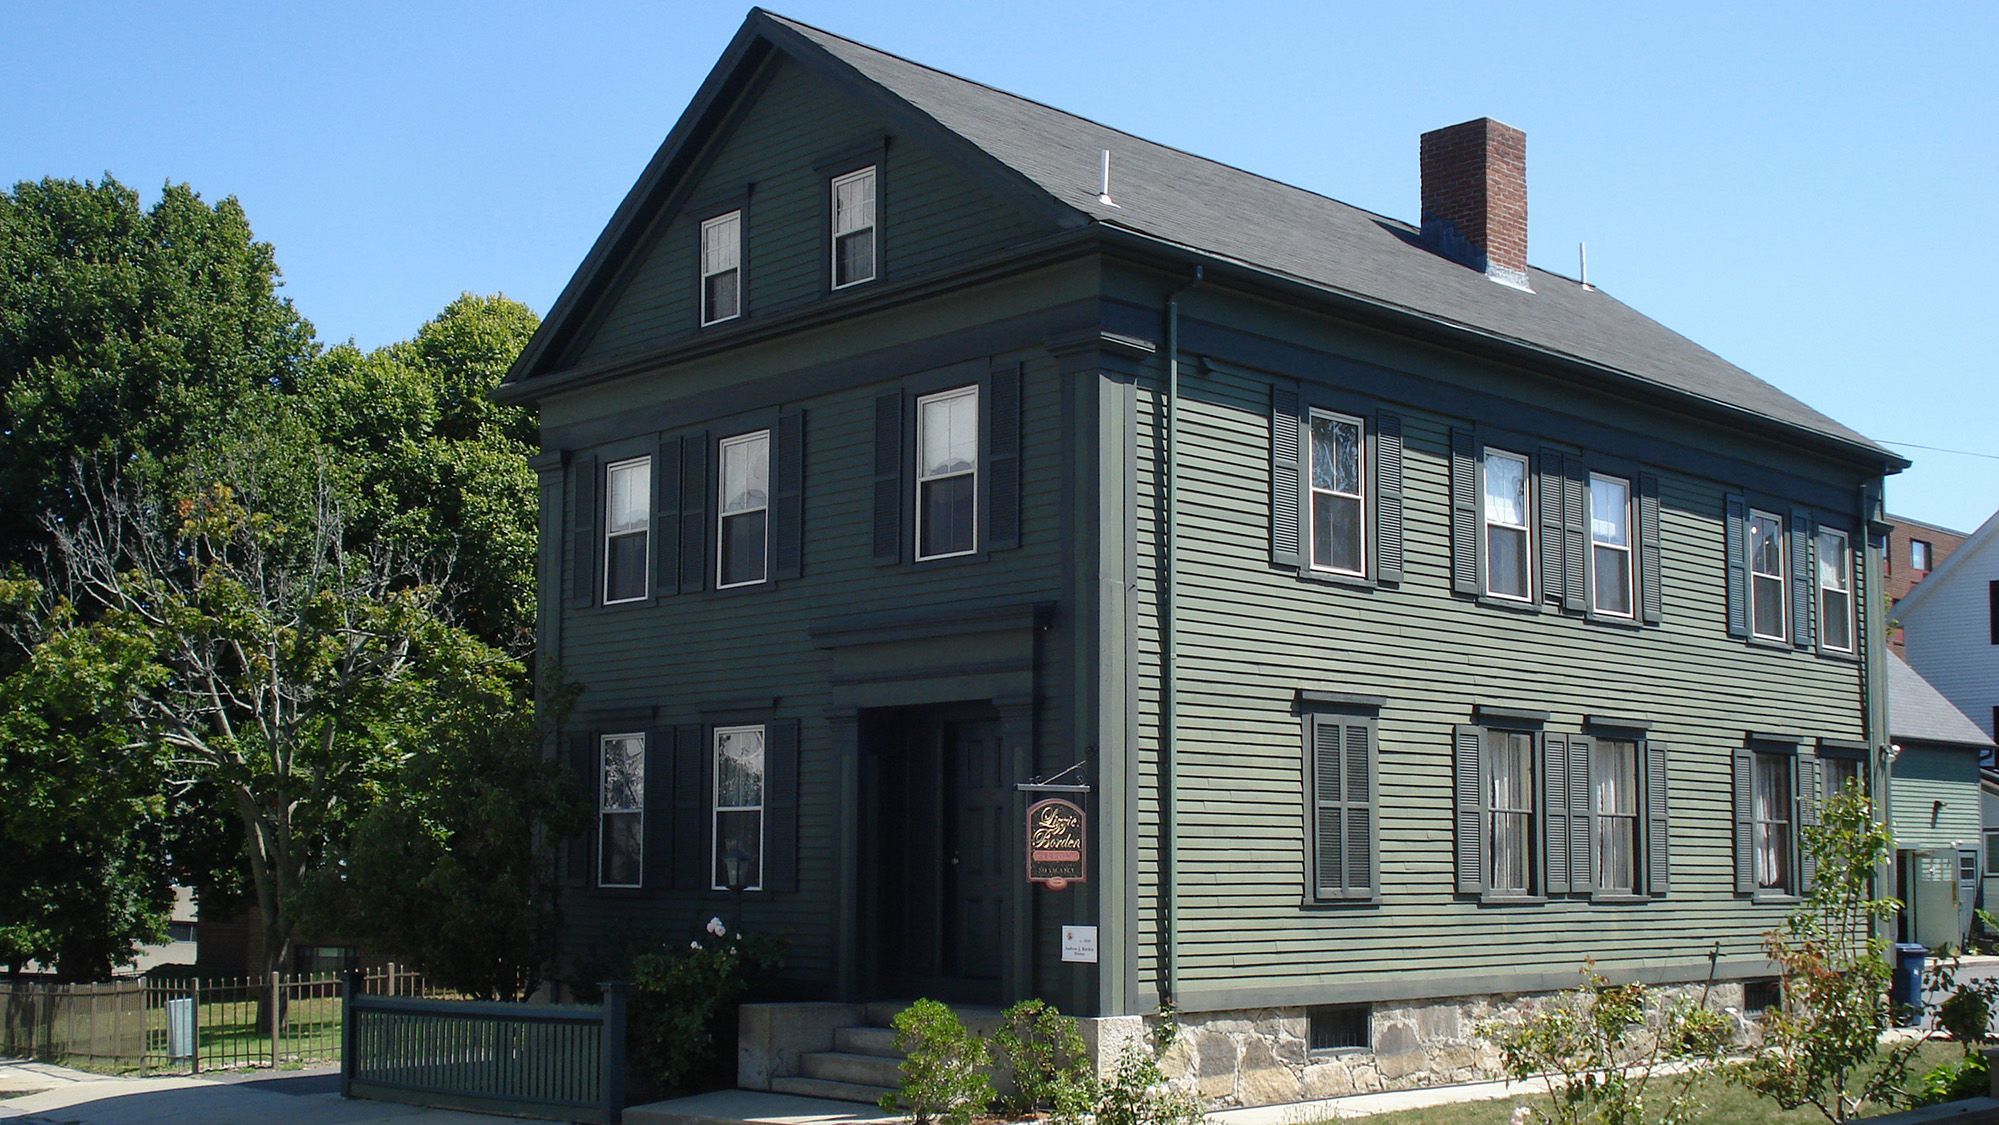 The Borden home in Fall River, Massachusetts, where the murders of Lizzie Borden's parents occurred, is now a bed and breakfast.